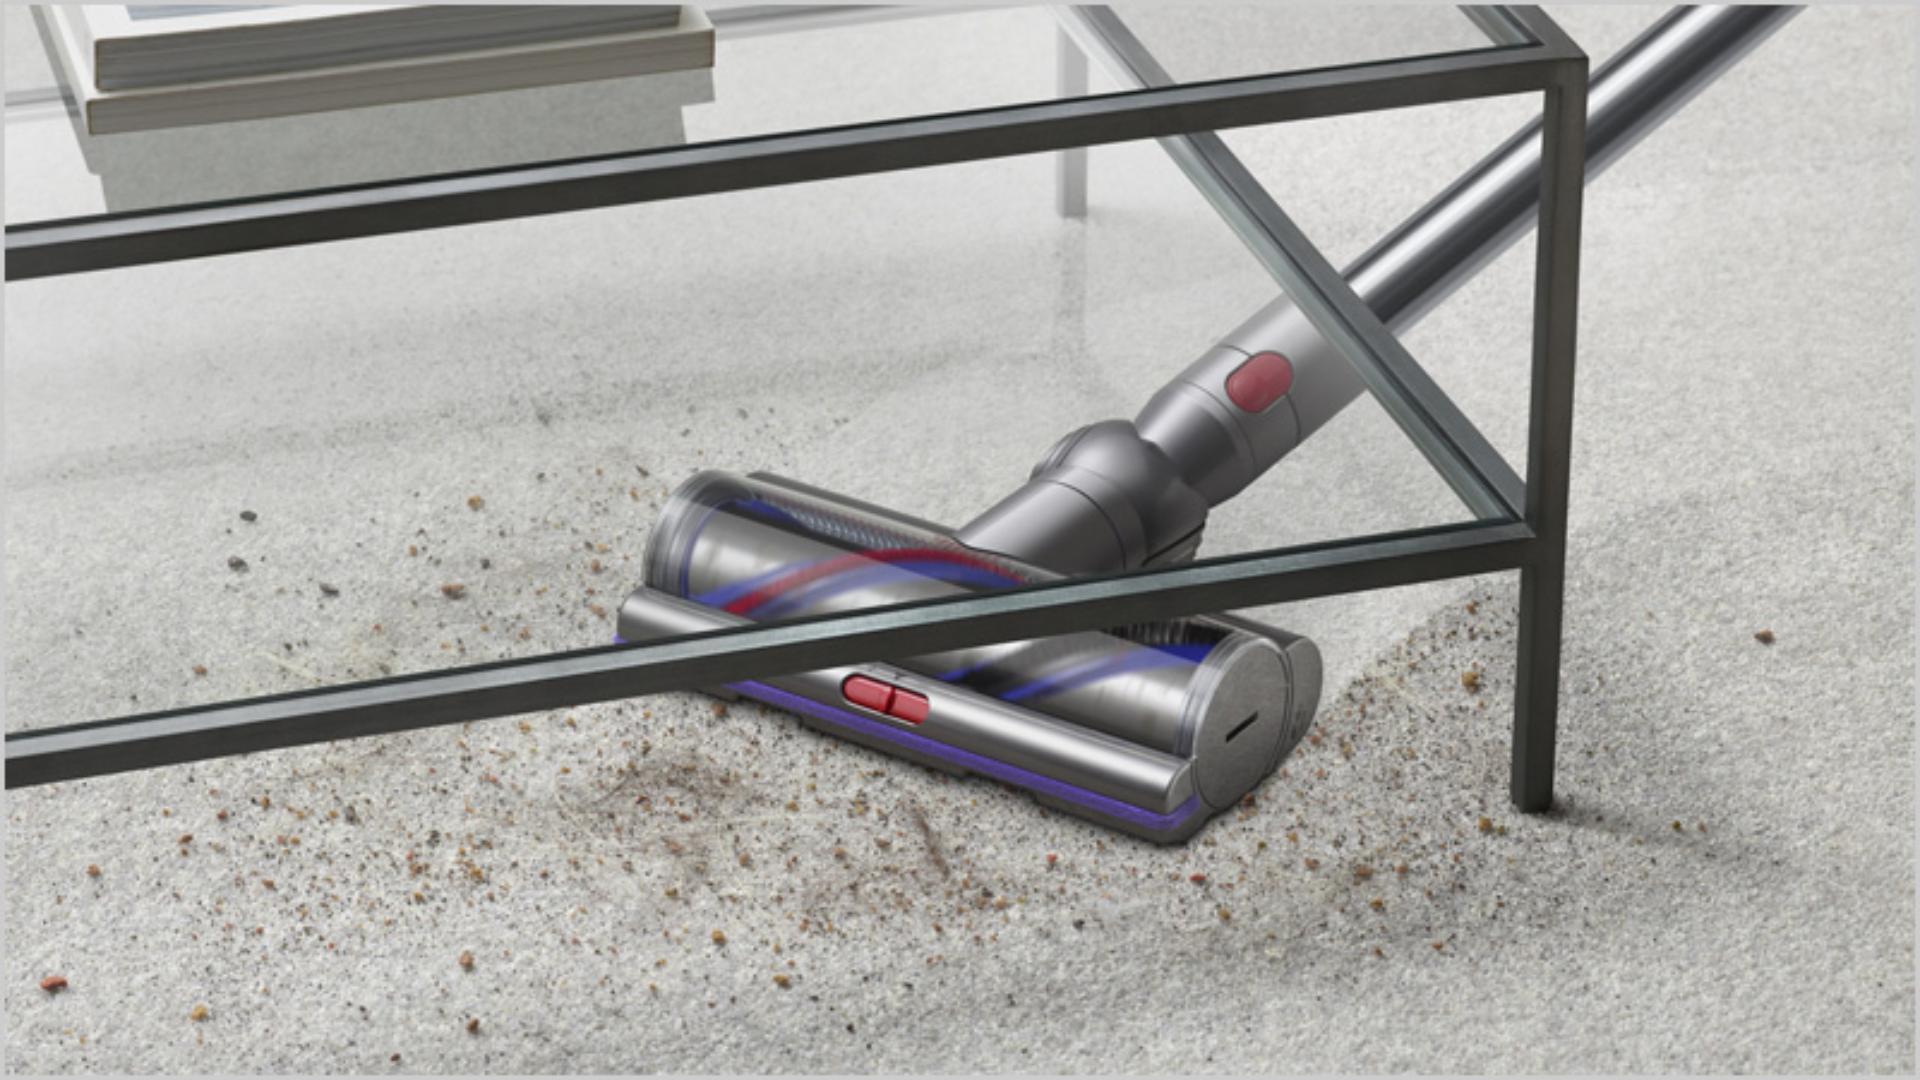 Dyson V15 Detect vacuum cleaning a floor